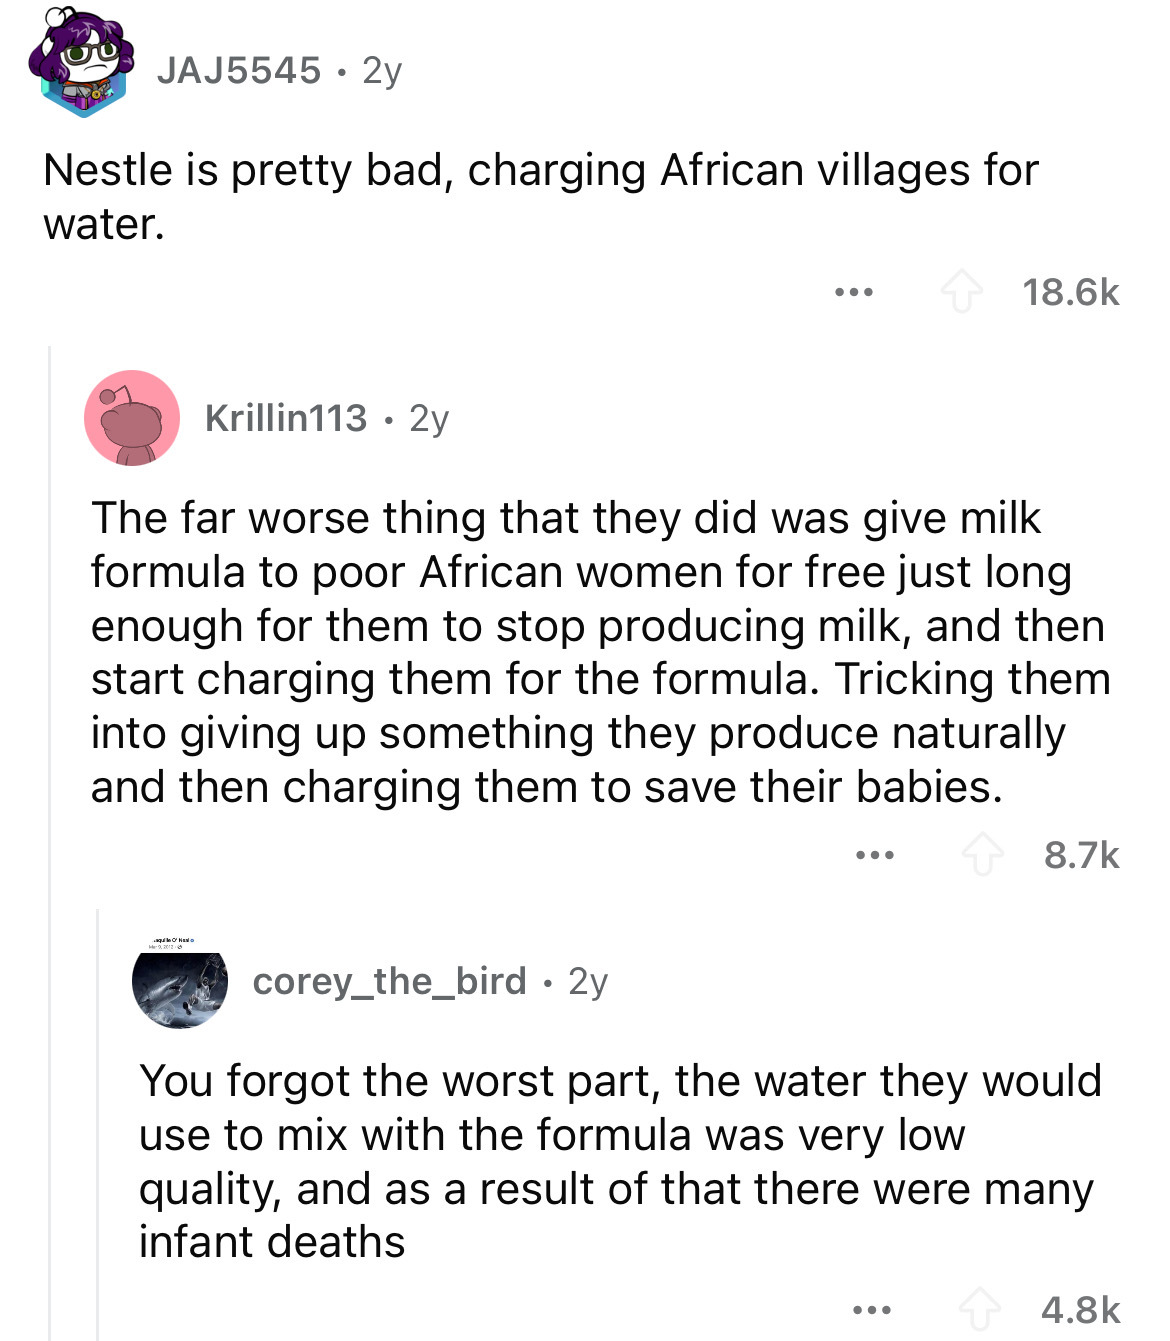 screenshot - JAJ5545 2y Nestle is pretty bad, charging African villages for water. Krillin113.2y The far worse thing that they did was give milk formula to poor African women for free just long enough for them to stop producing milk, and then start chargi